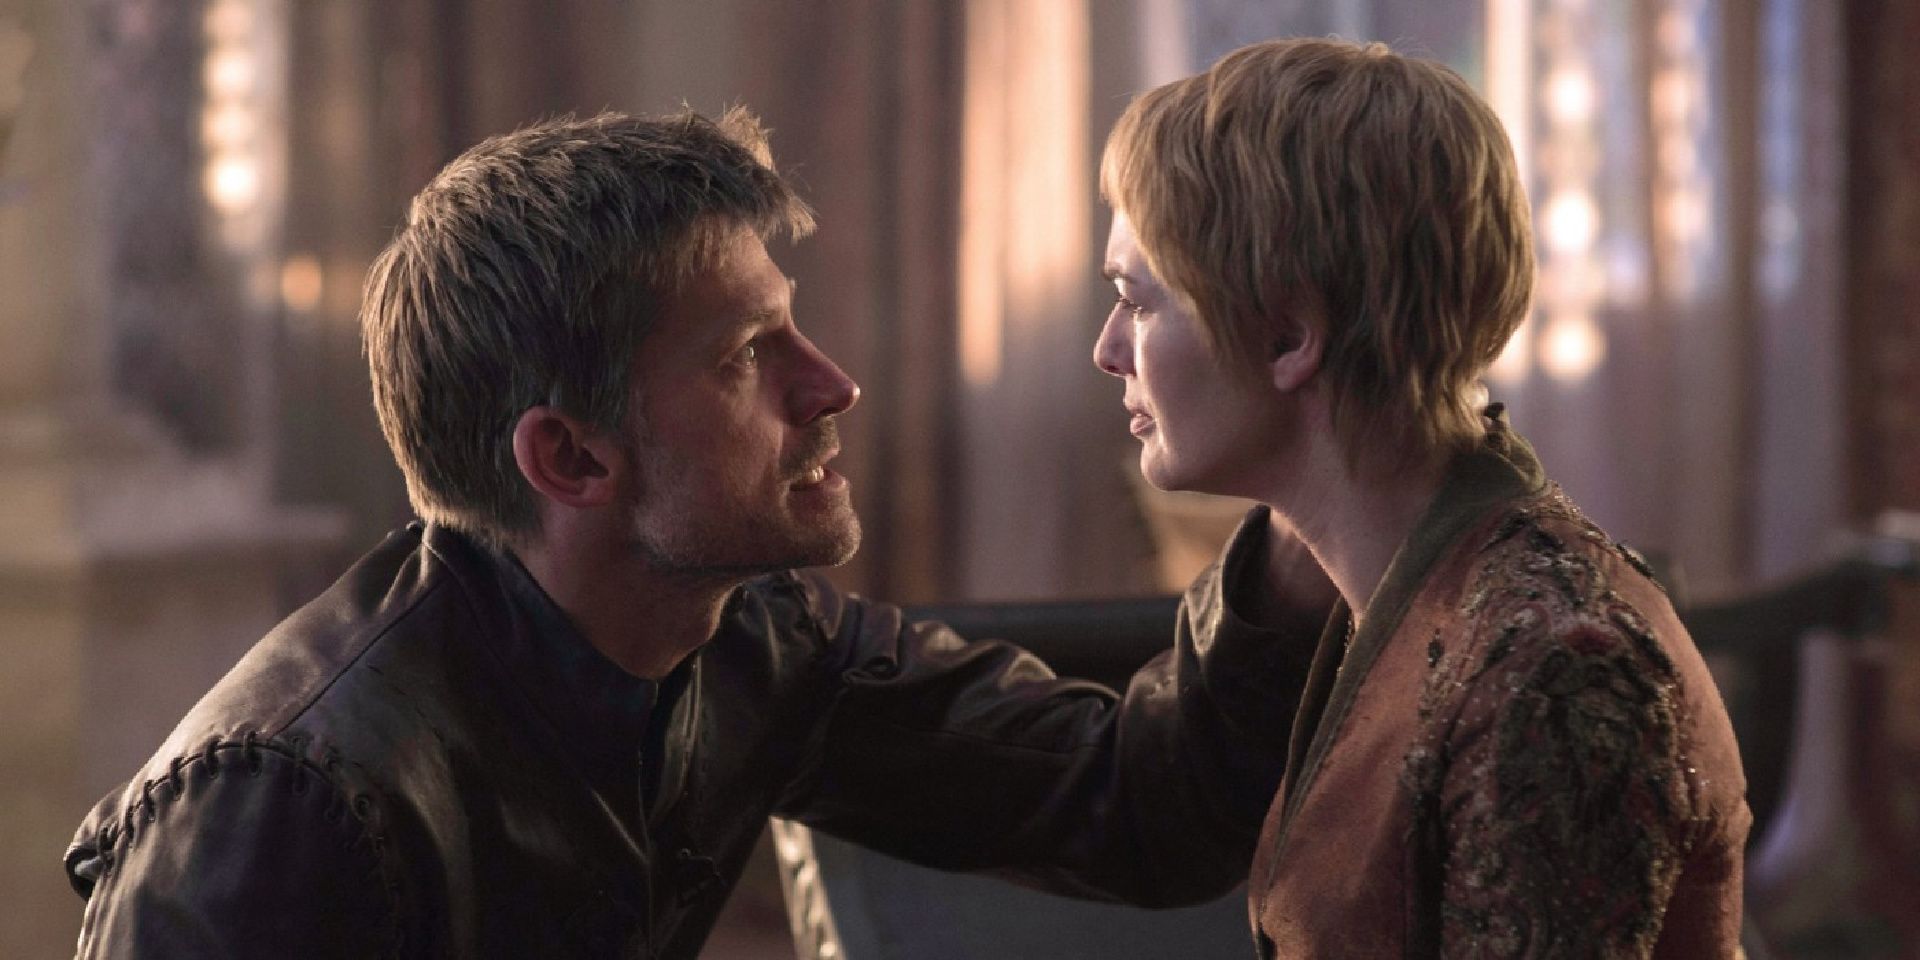 Cersei and Jamie have a serious moment in Game of Thrones